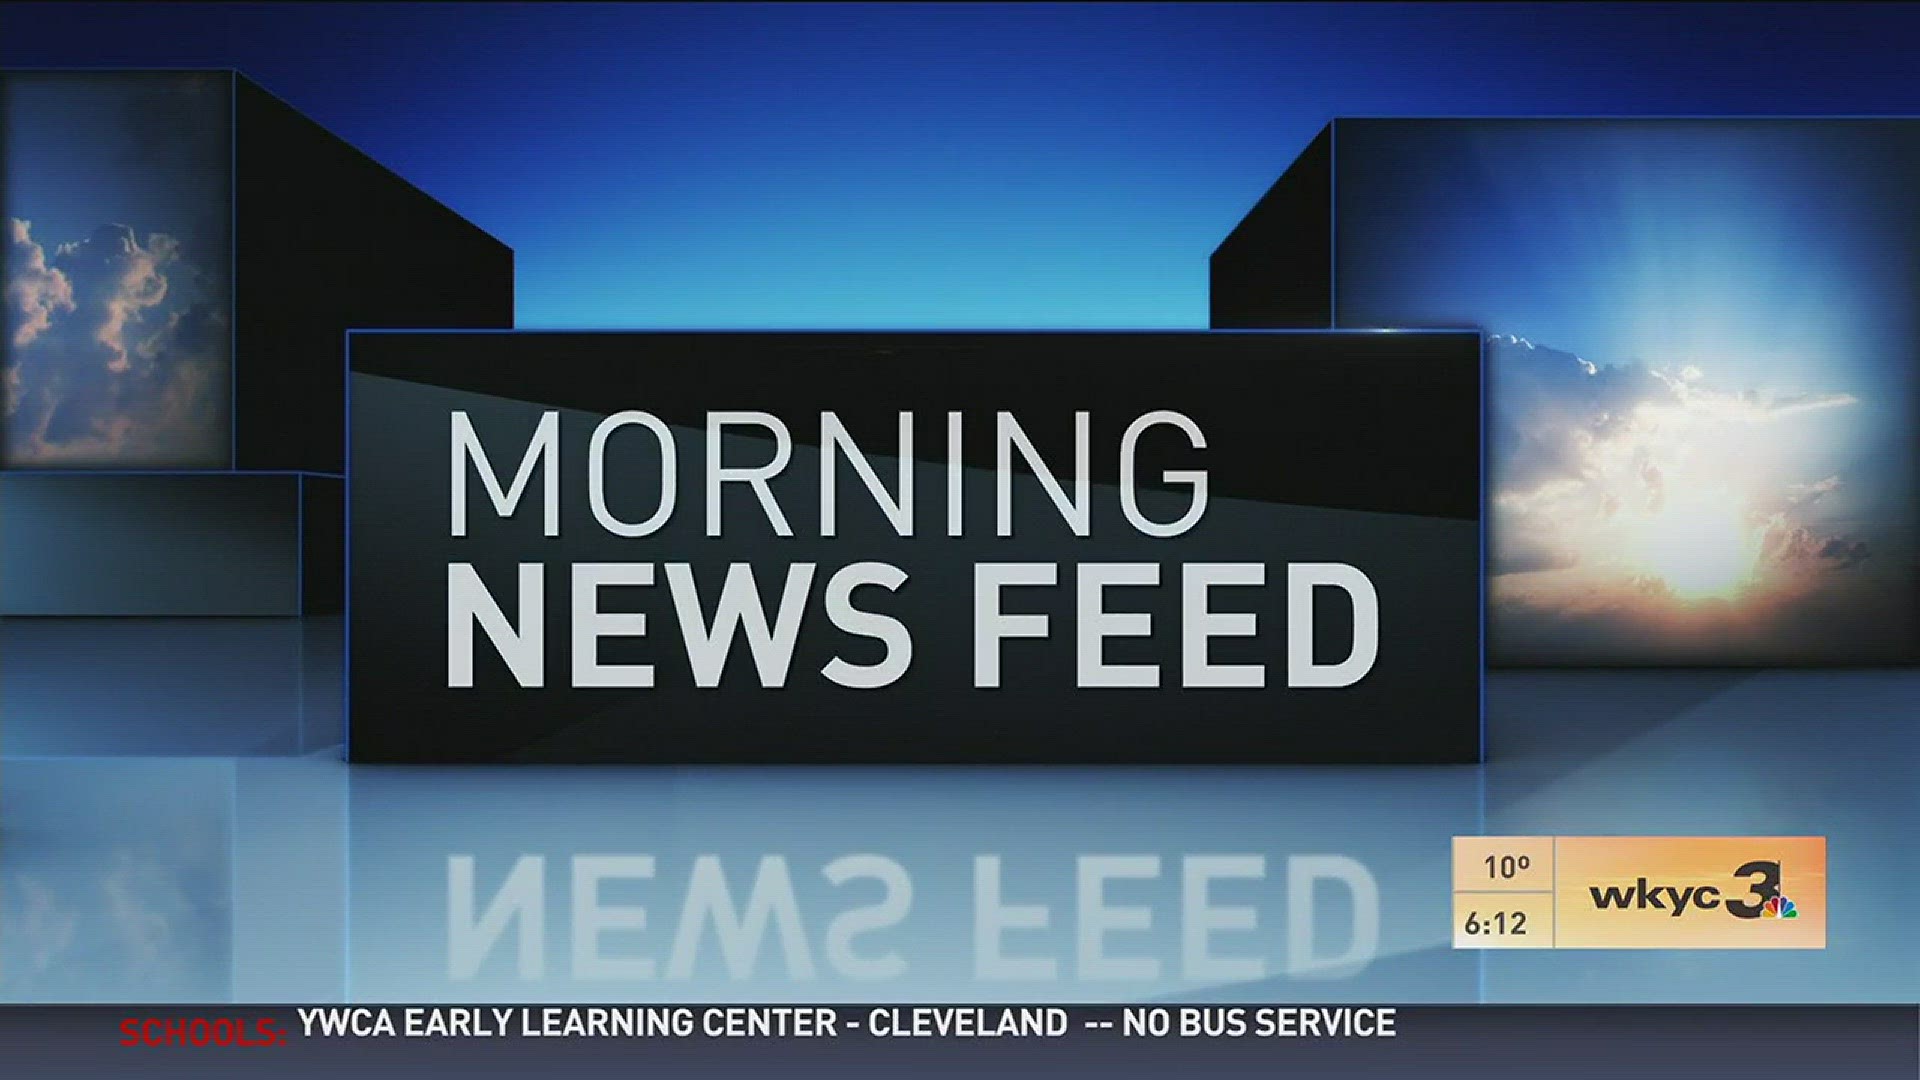 WKYC's Maureen Kyle delivers a dose of today's top headlines in this edition of the "Morning News Feed." Be sure to follow @MaureenKyle on Twitter for loads more daily news updates.